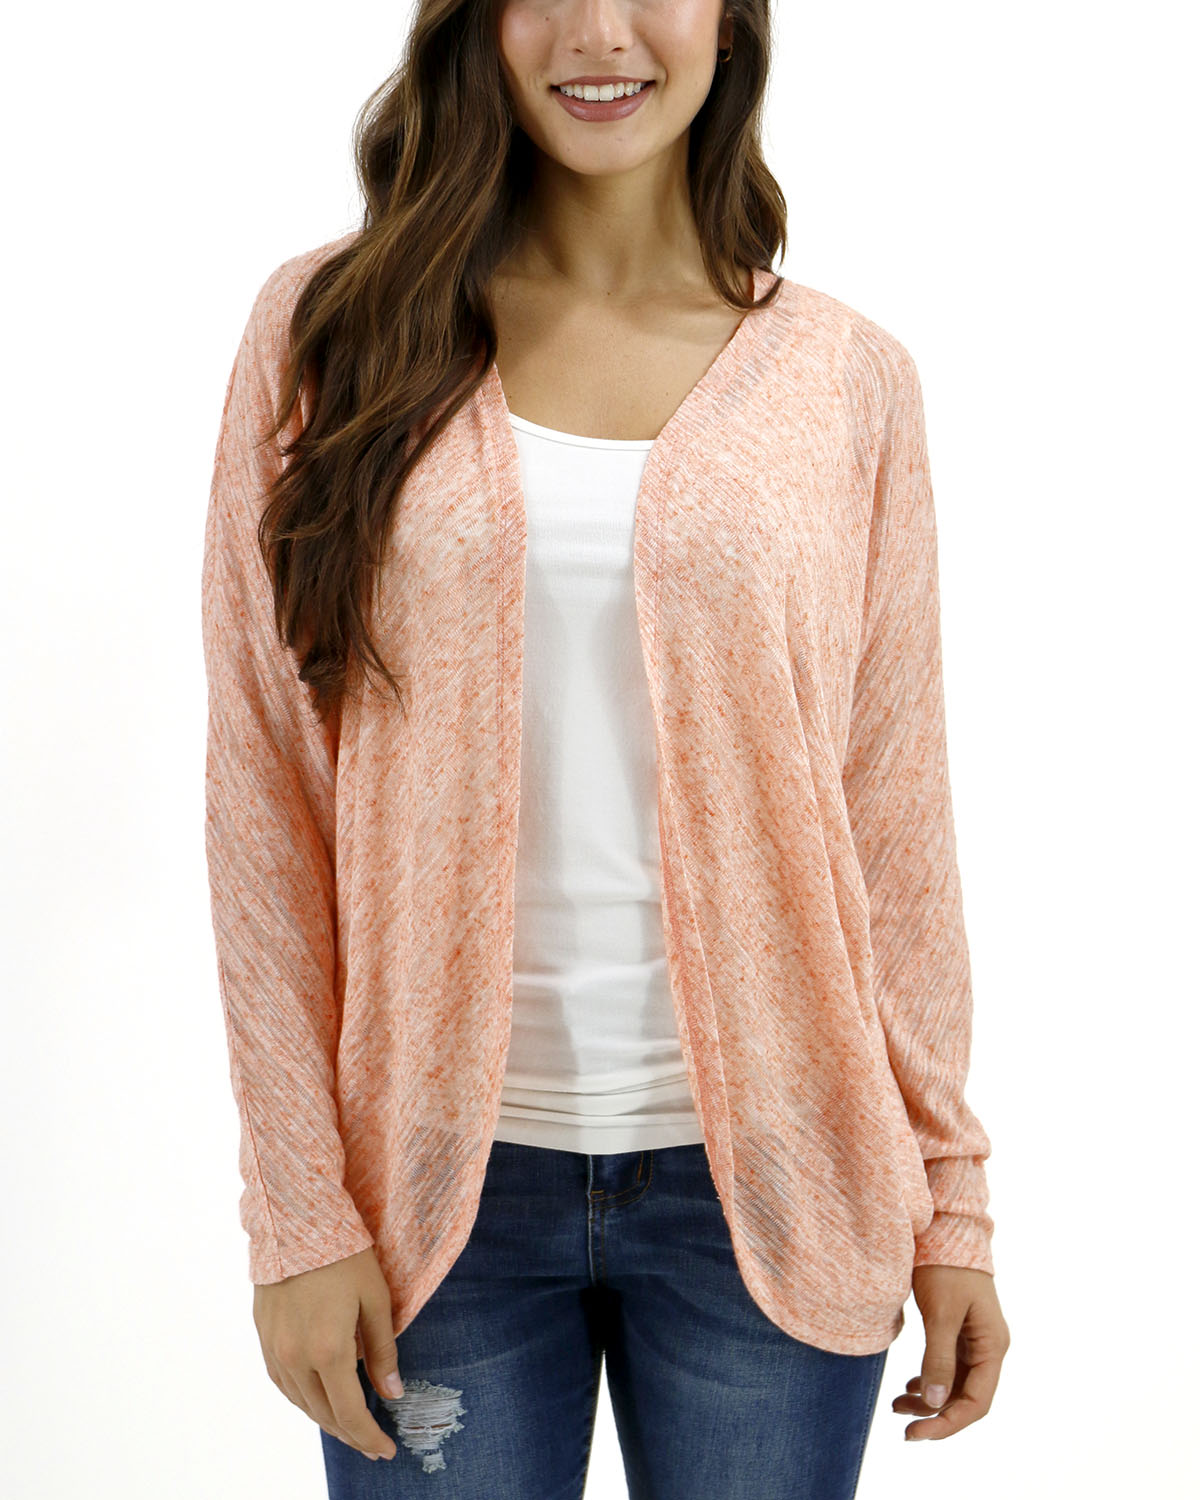 Airy Cocoon Cardigan Grace in Dreamsicle and Slub - Lace FINAL - SALE